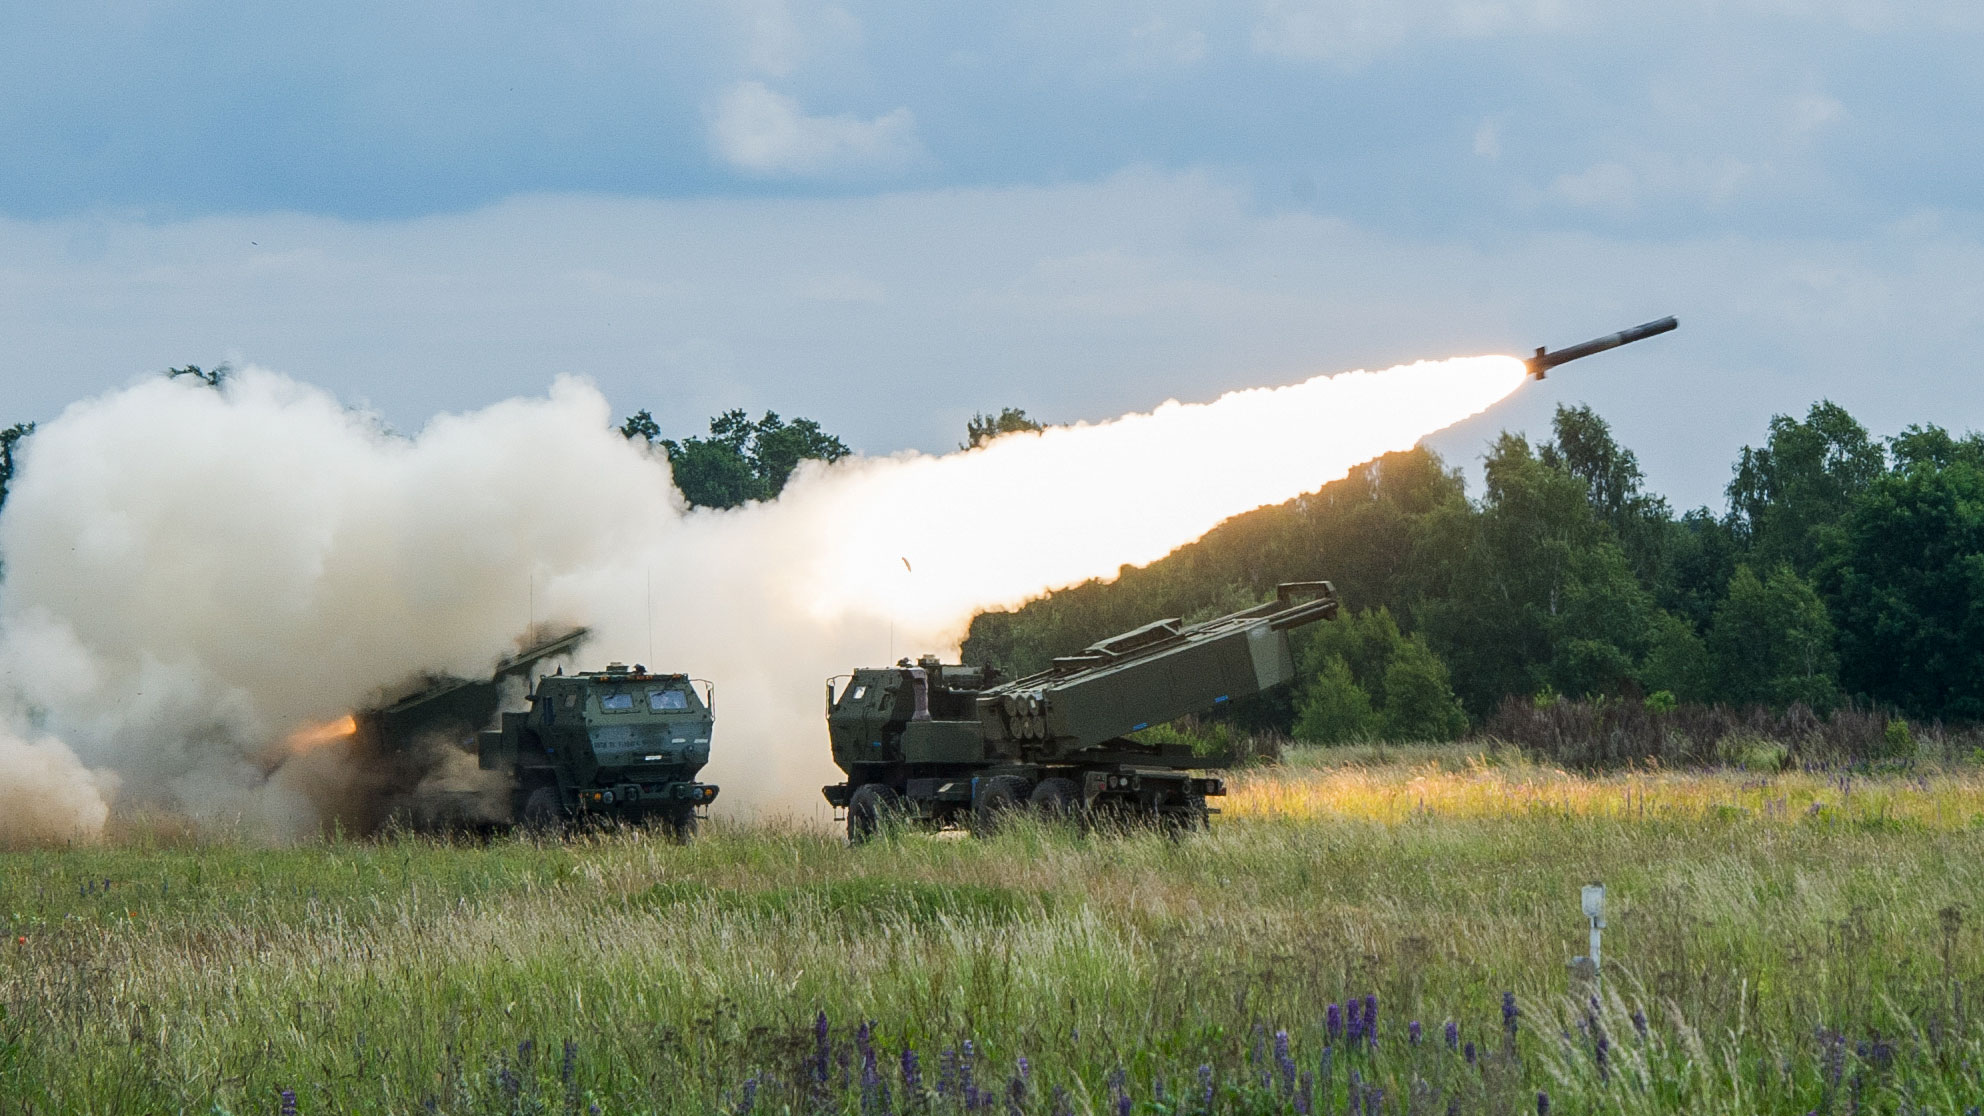 The russian Ministry of Defense claimed to have destroyed the HIMARS loader, which actually does not exist